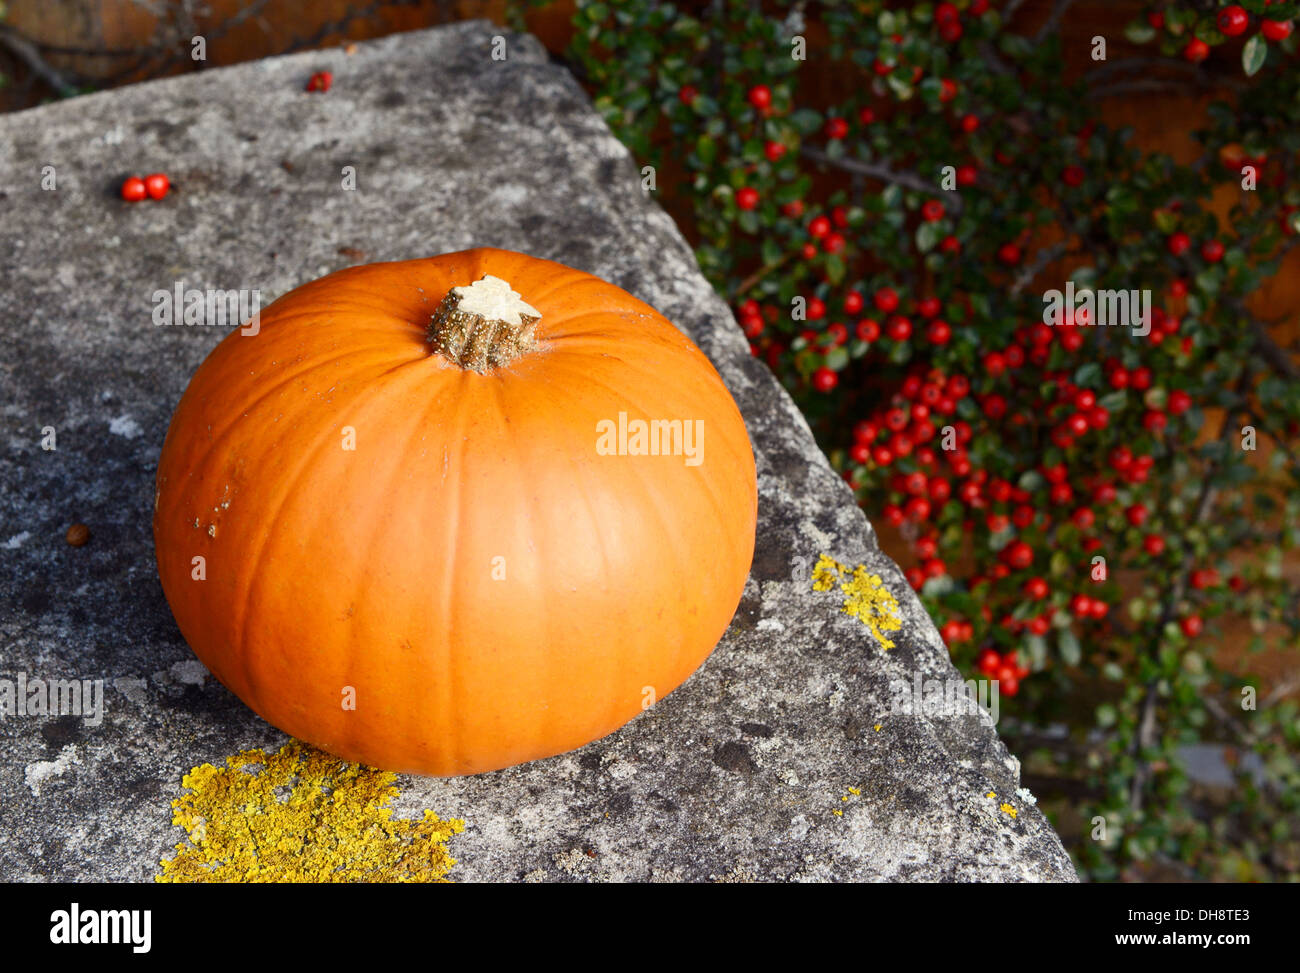 Ripe pumpkin on a stone bench against a background of red cotoneaster berries Stock Photo